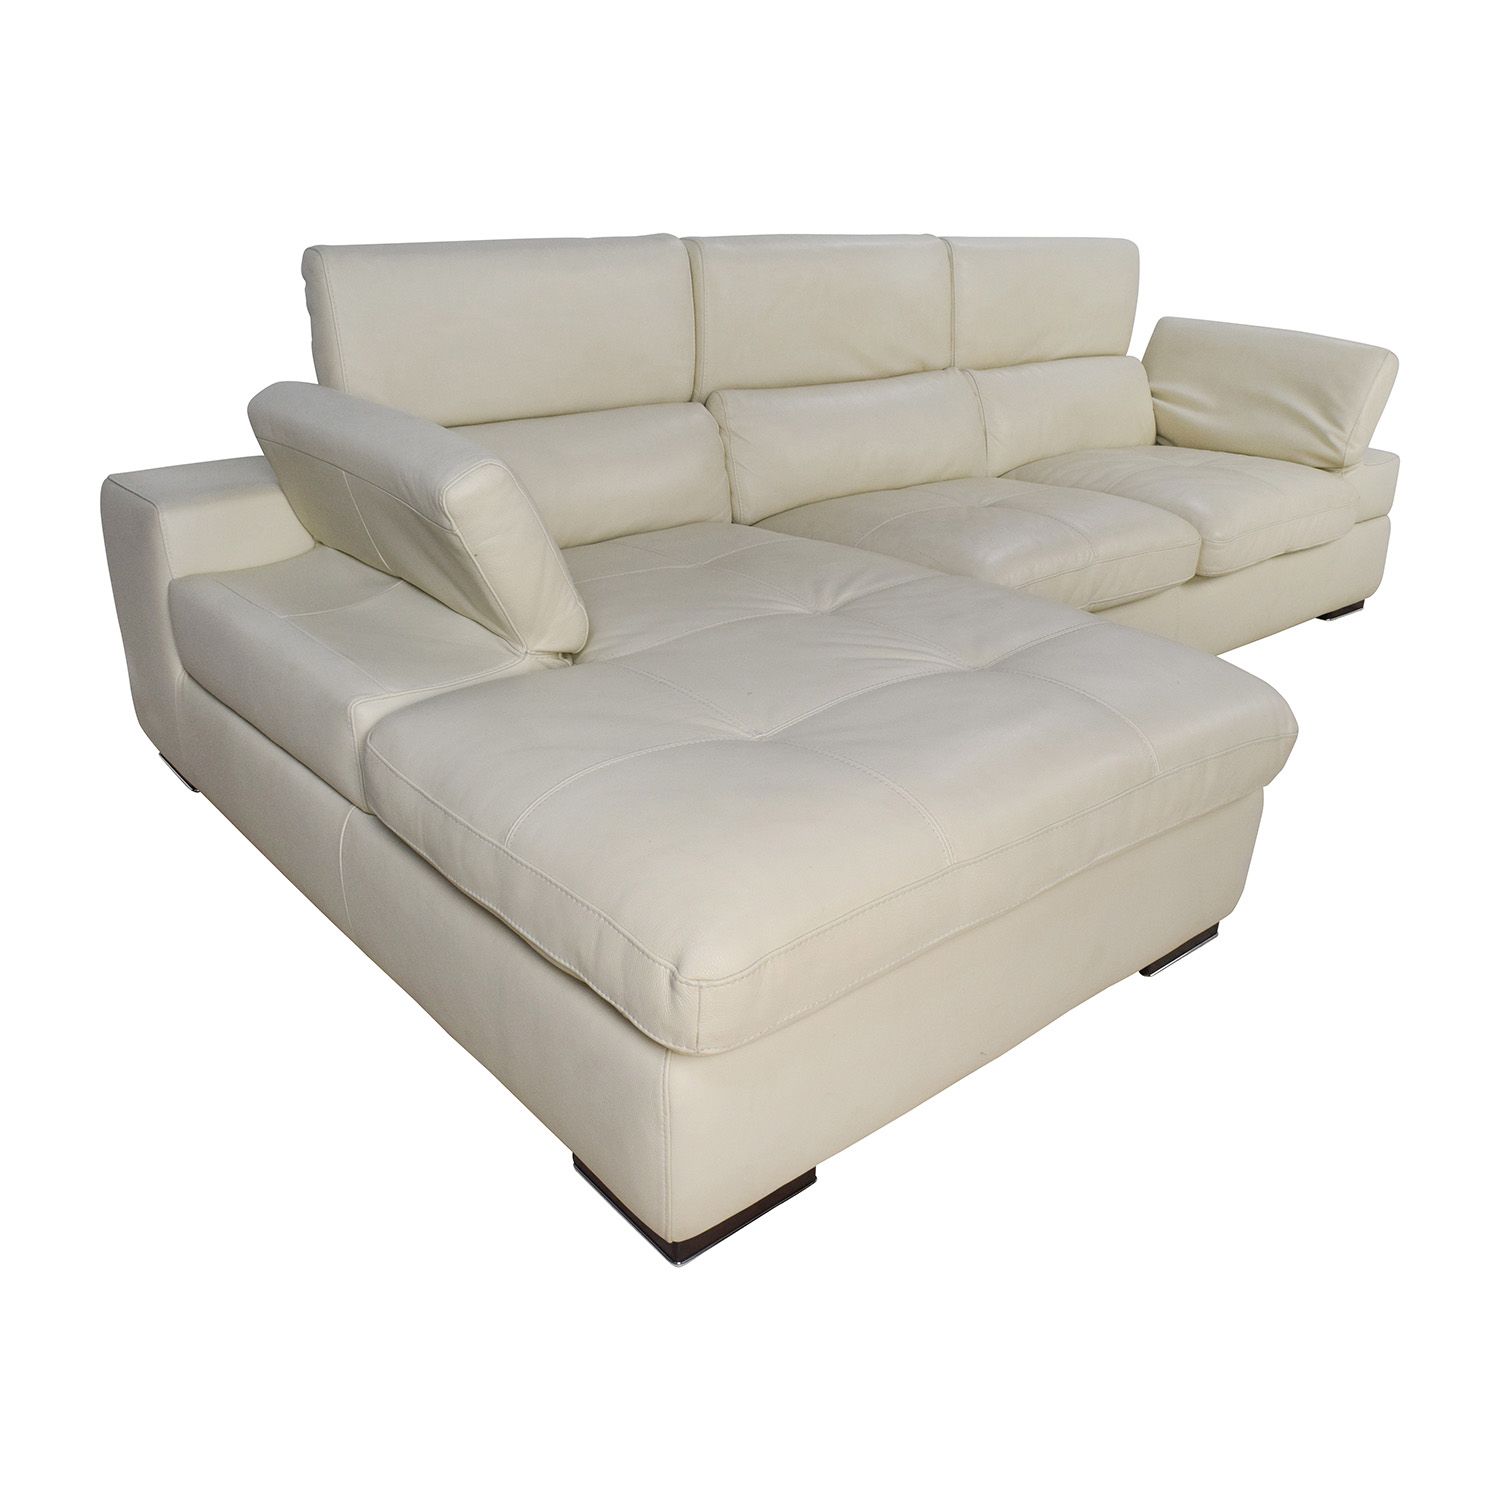 69% Off – L Shaped Cream Leather Sectional Sofa / Sofas Pertaining To Owego L Shaped Sectional Sofas (View 13 of 15)